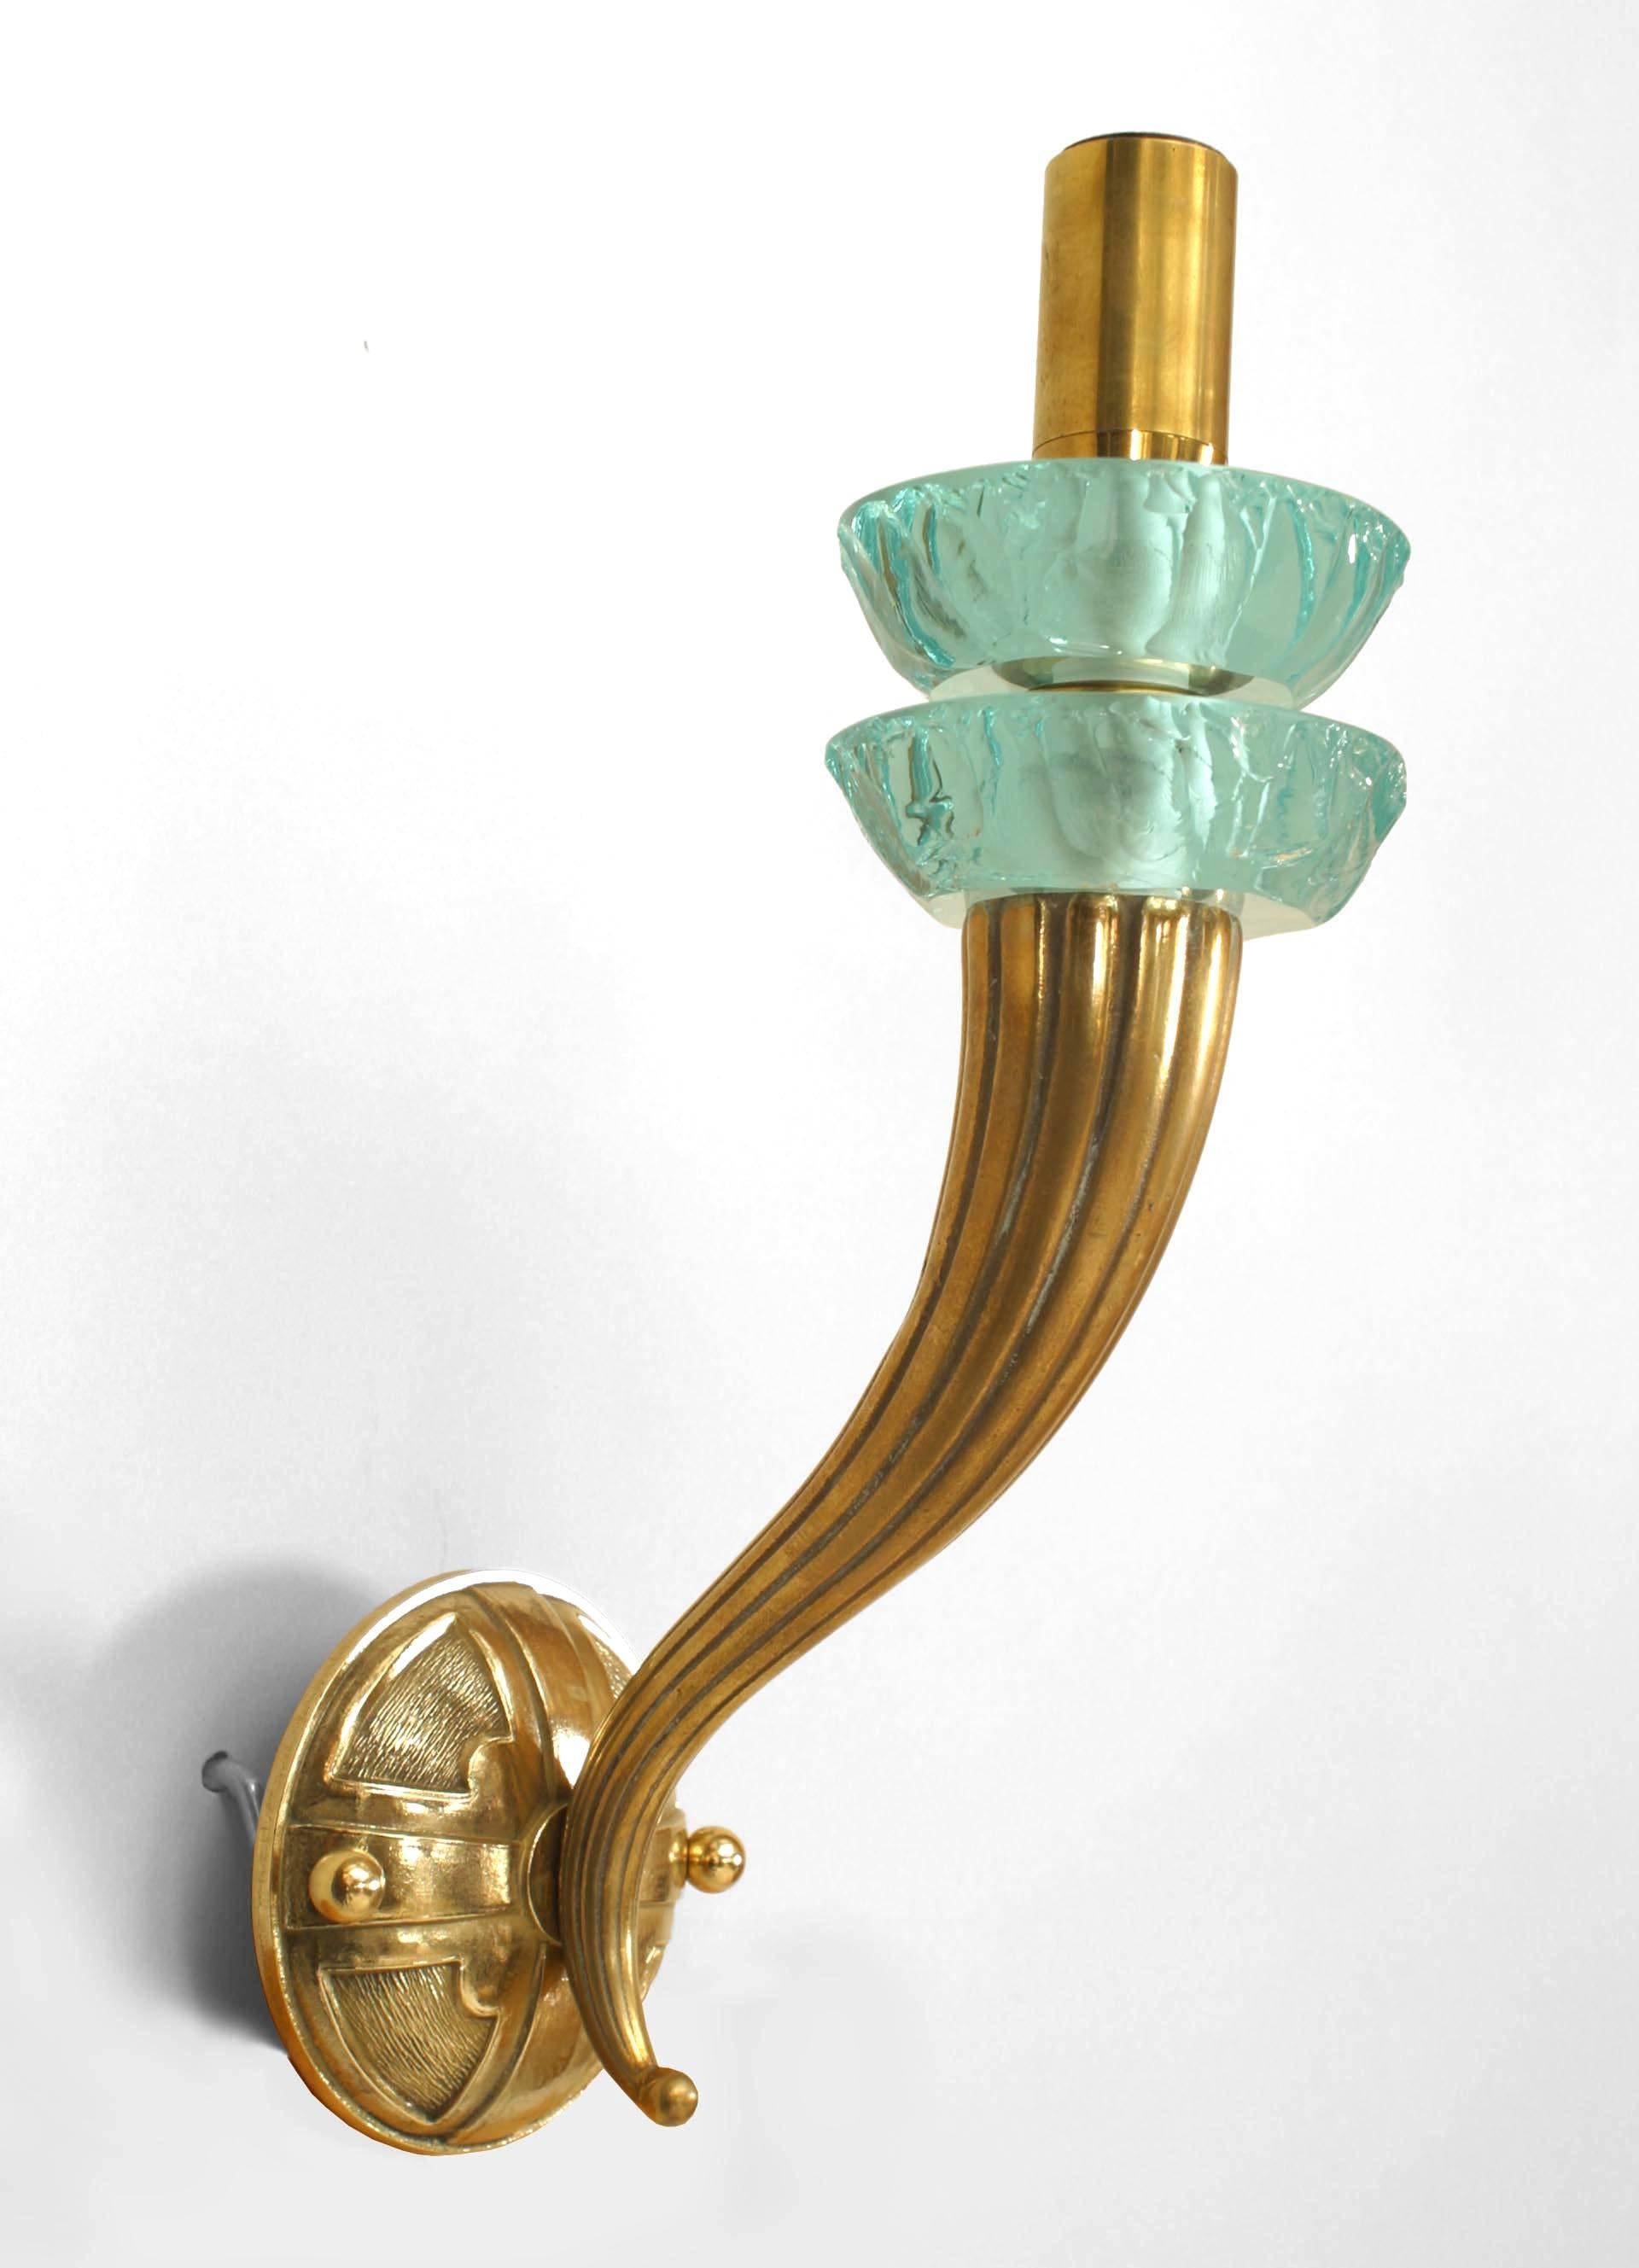 Pair of French Art Deco brass single arm wall sconce with a fluted cornucopia form and round backplate supporting 2 turquoise rough cut round glass bobeches (PRICED AS Pair)
